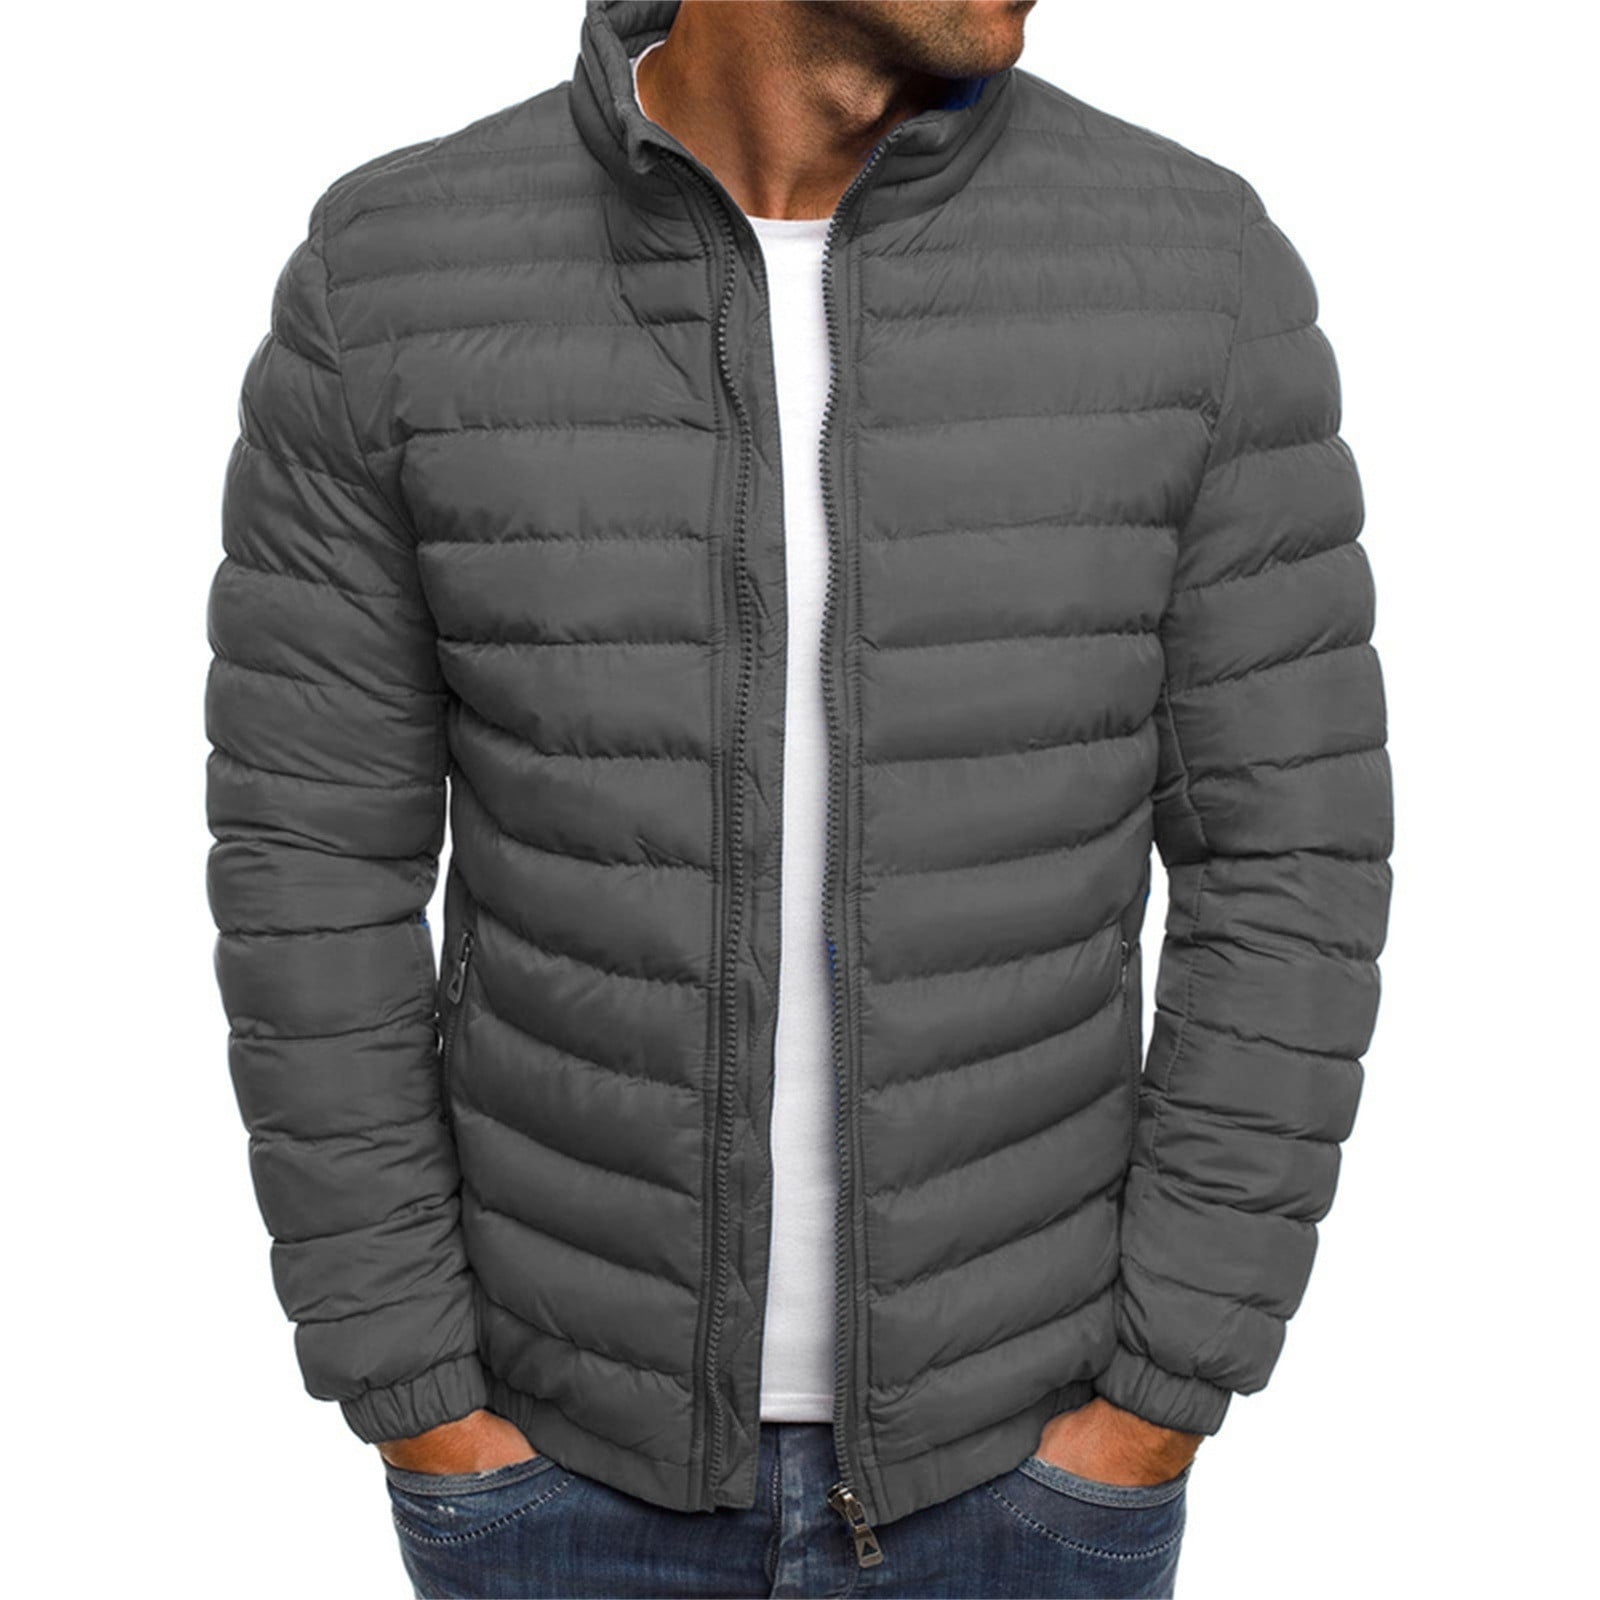 BELLZELY Winter Jackets for Men Clearance Men's Solid Color Jacket Cotton Padded  Jacket Trendy Cotton Padded Jacket Men's Warm Cotton Padded Jacket 